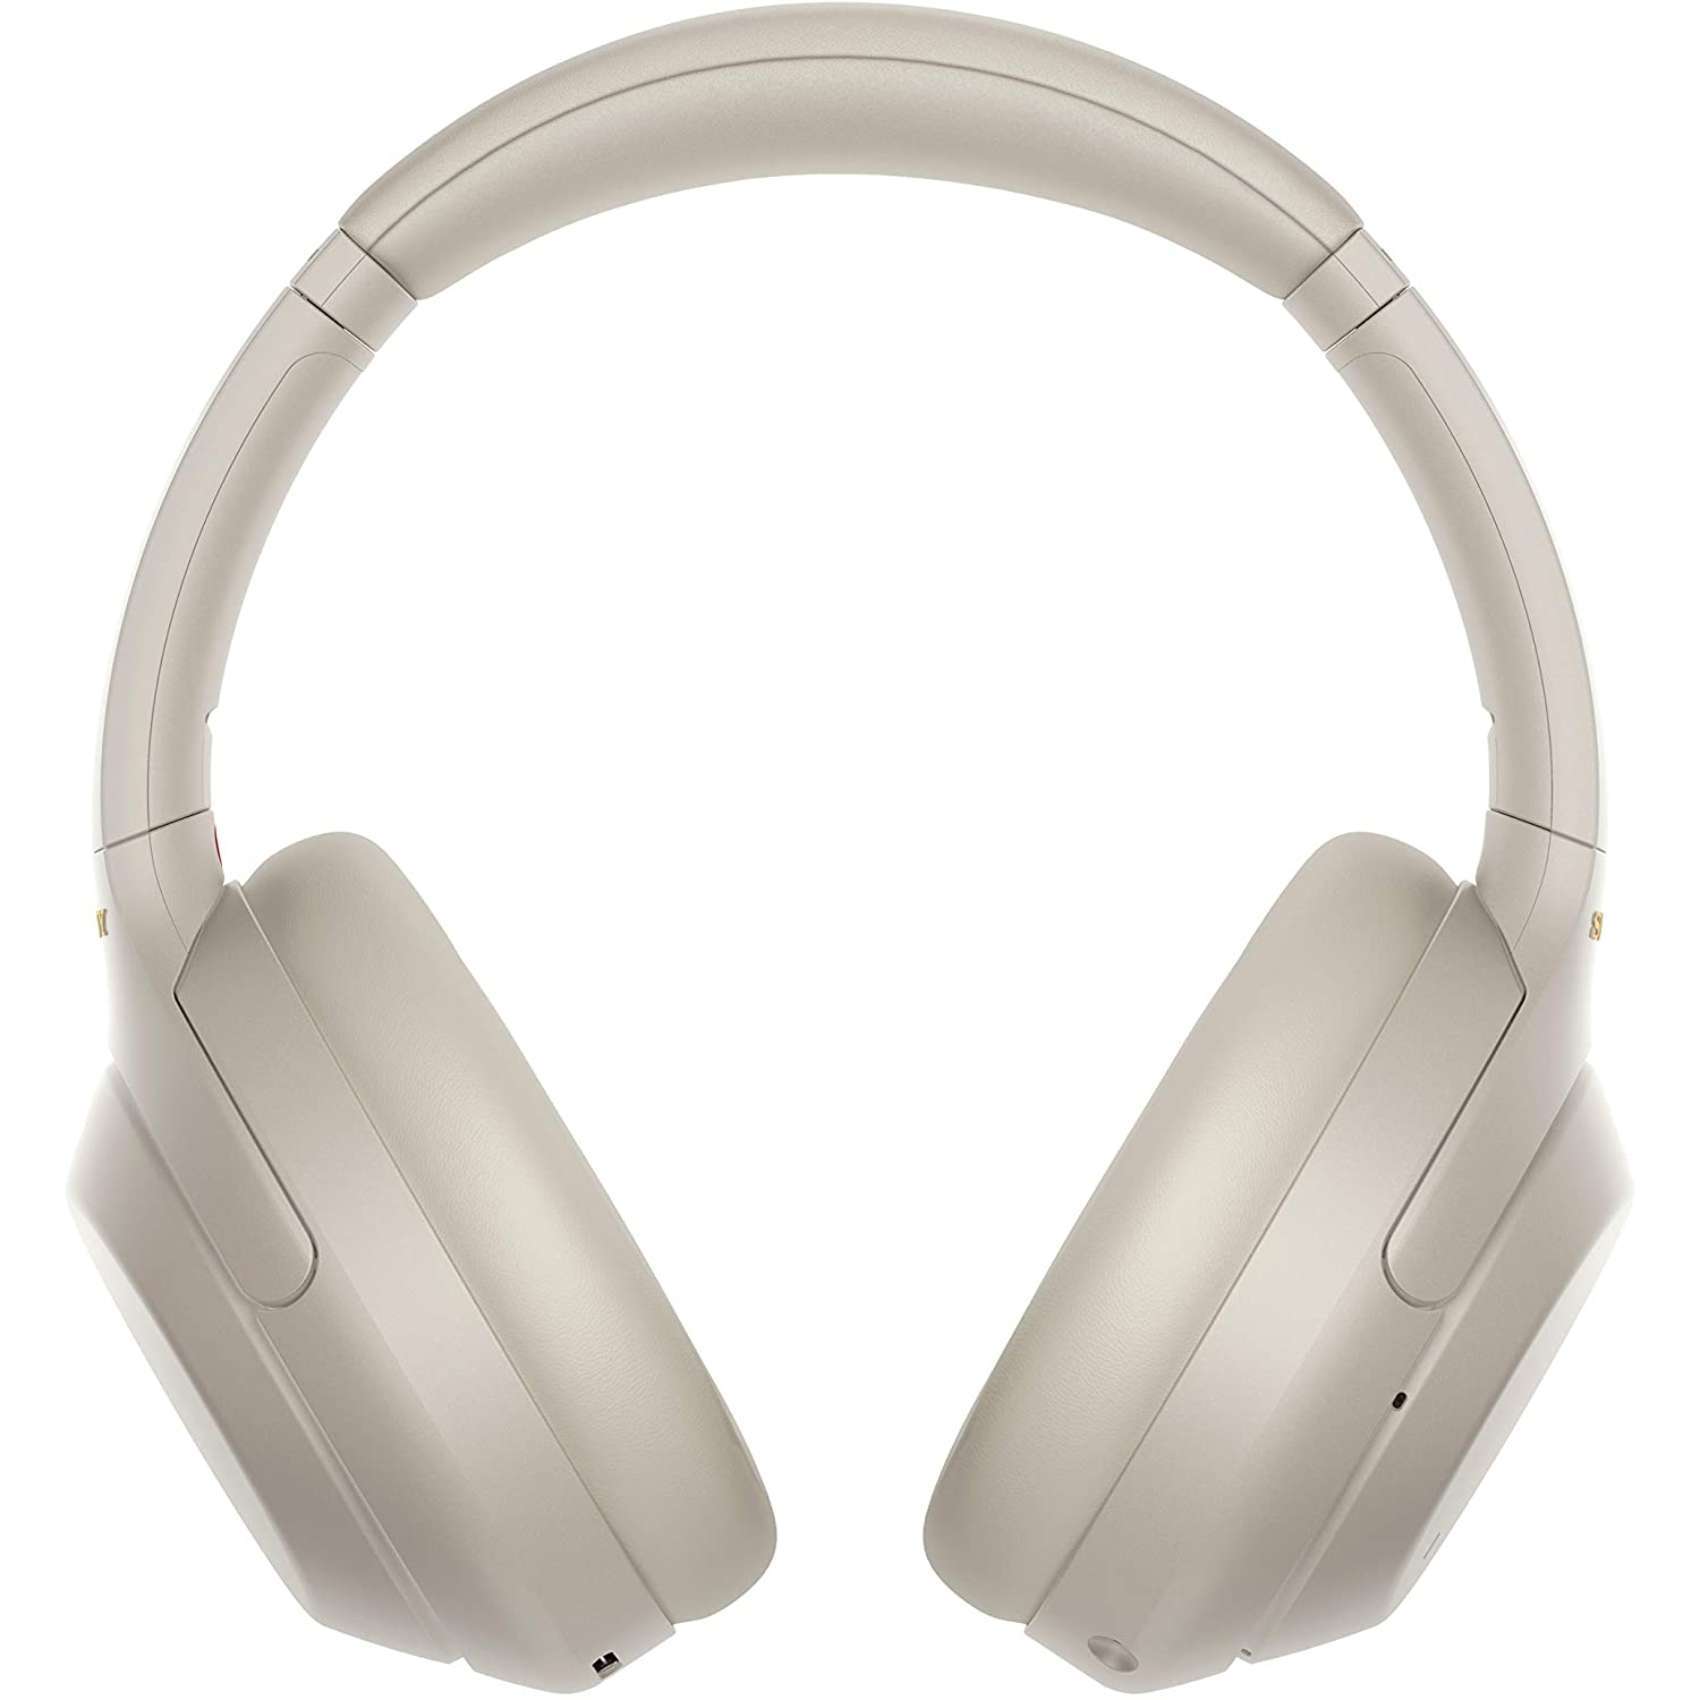 Buy Sony Wh 1000xm4 Wireless Noise Cancelling Bluetooth Over Ear Headphones With Speak To Chat Function Online Shop Smartphones Tablets Wearables On Carrefour Uae